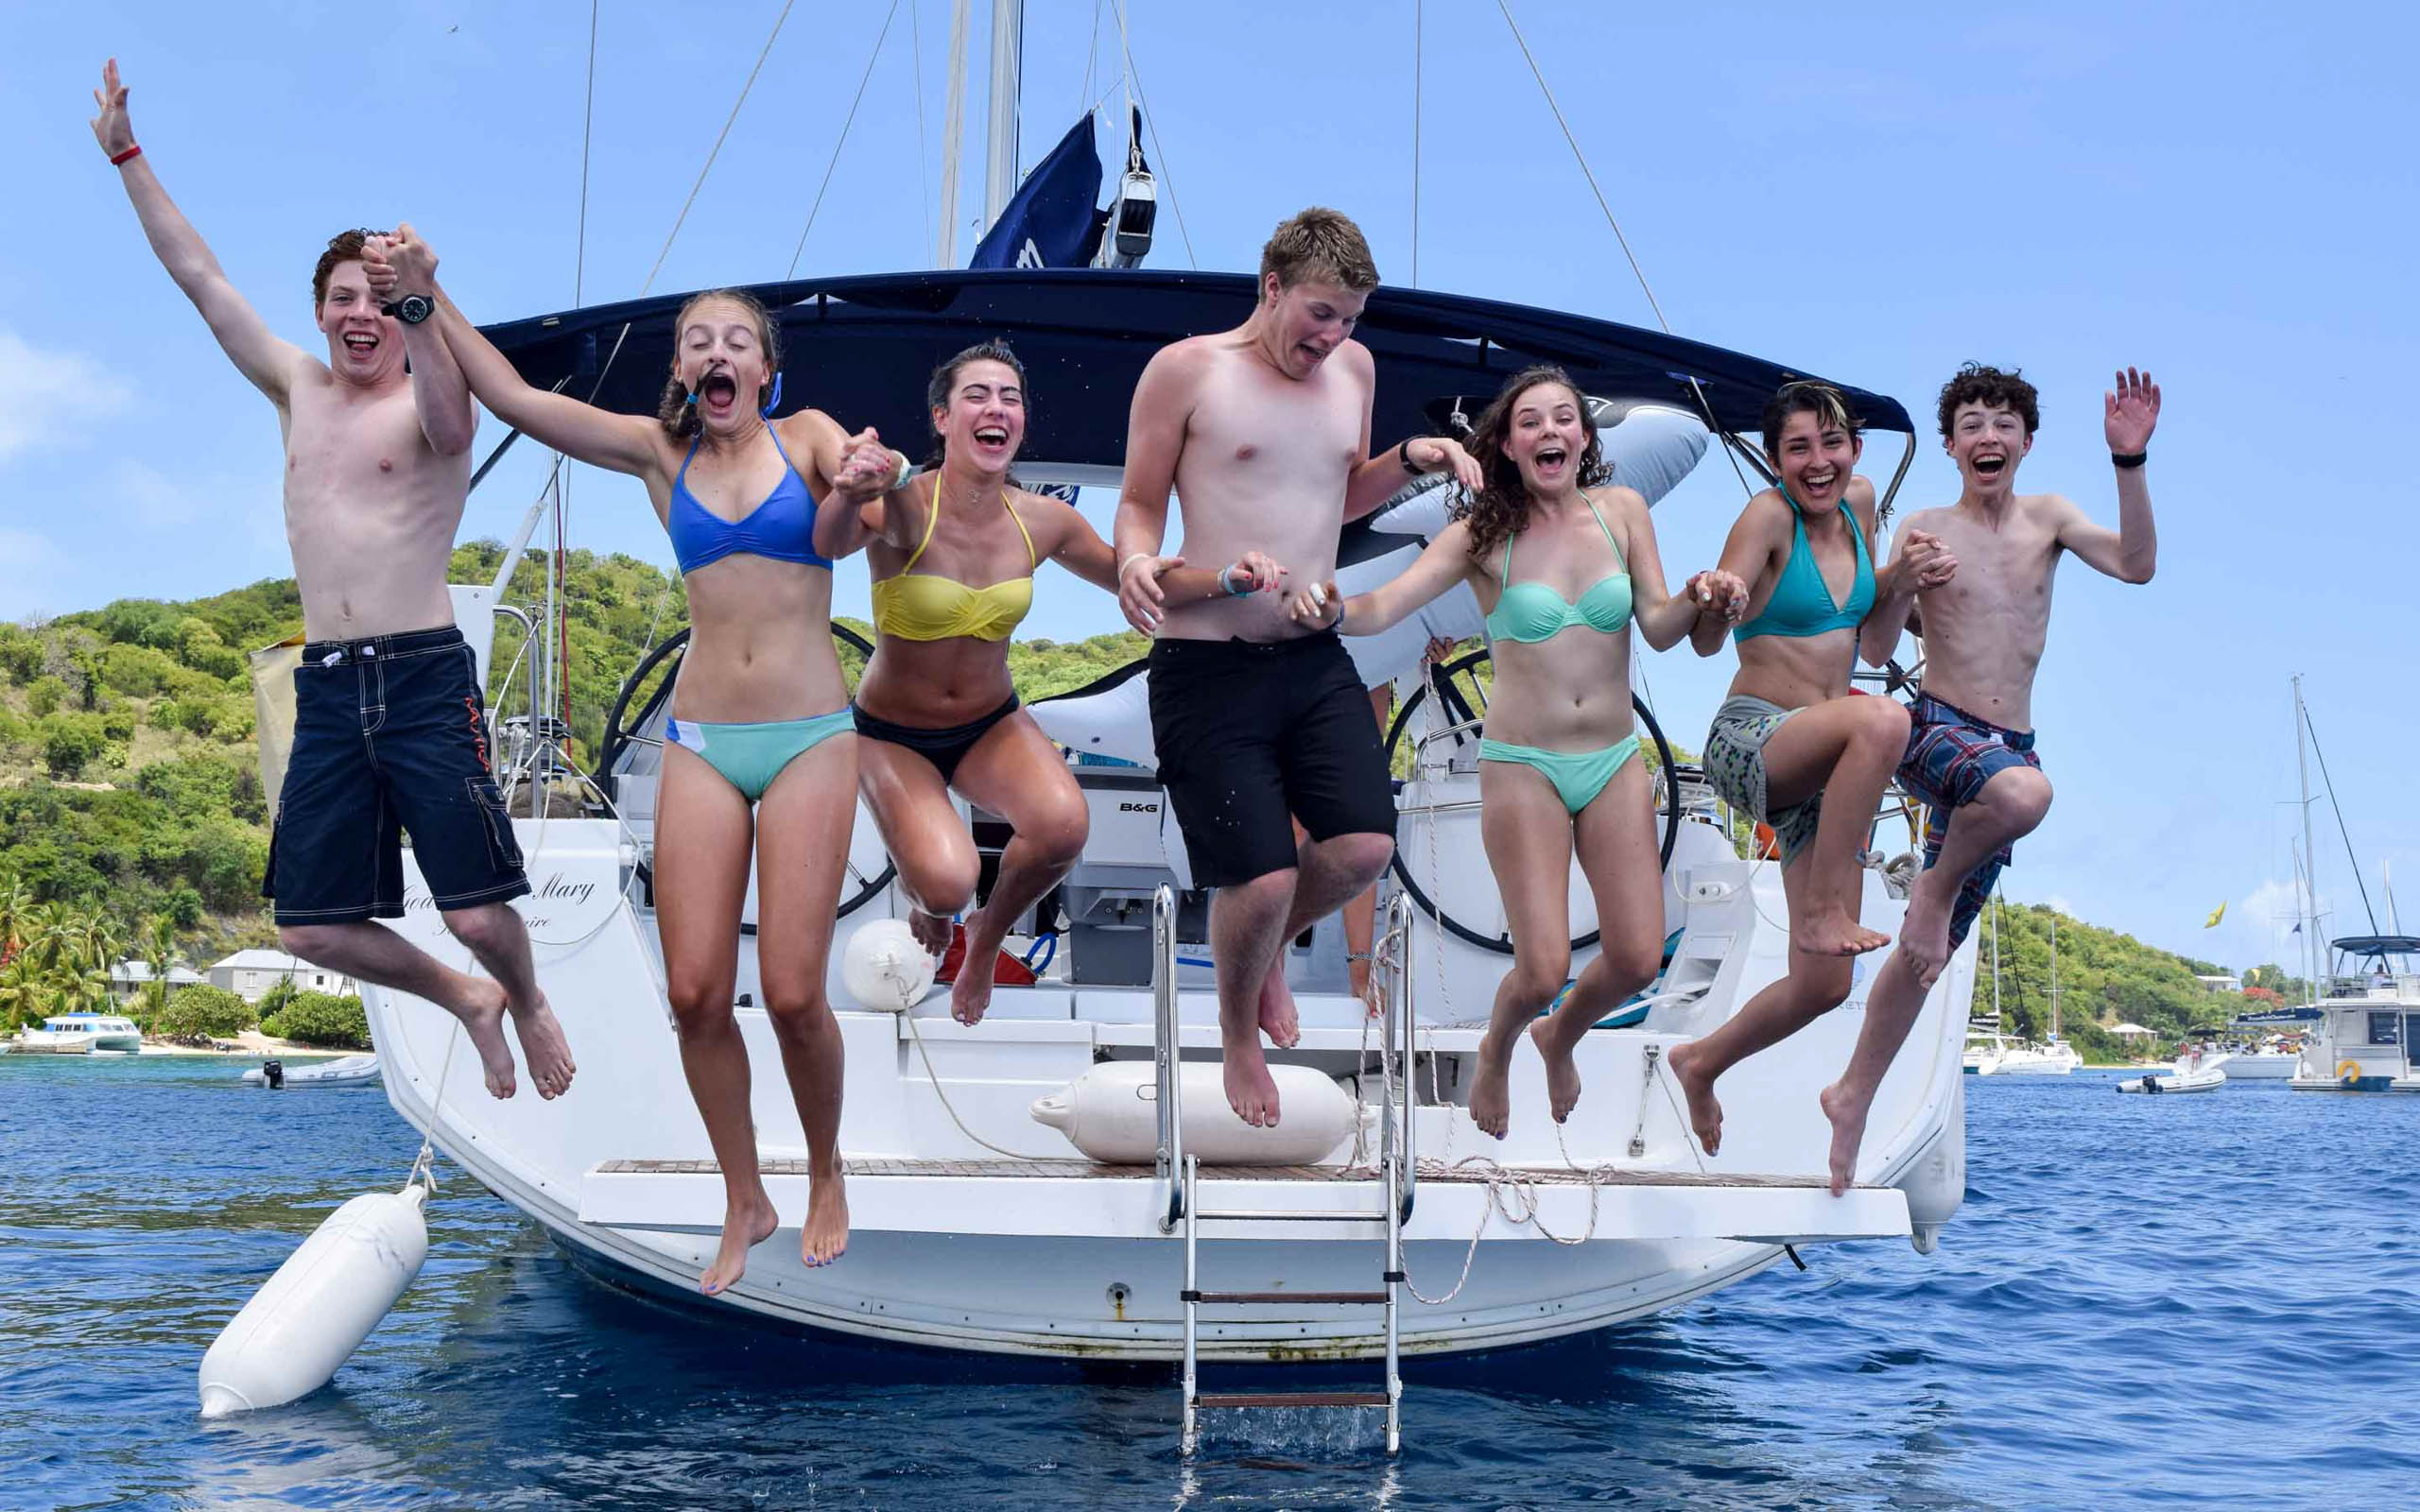 A group of people jumping on a sailboat.